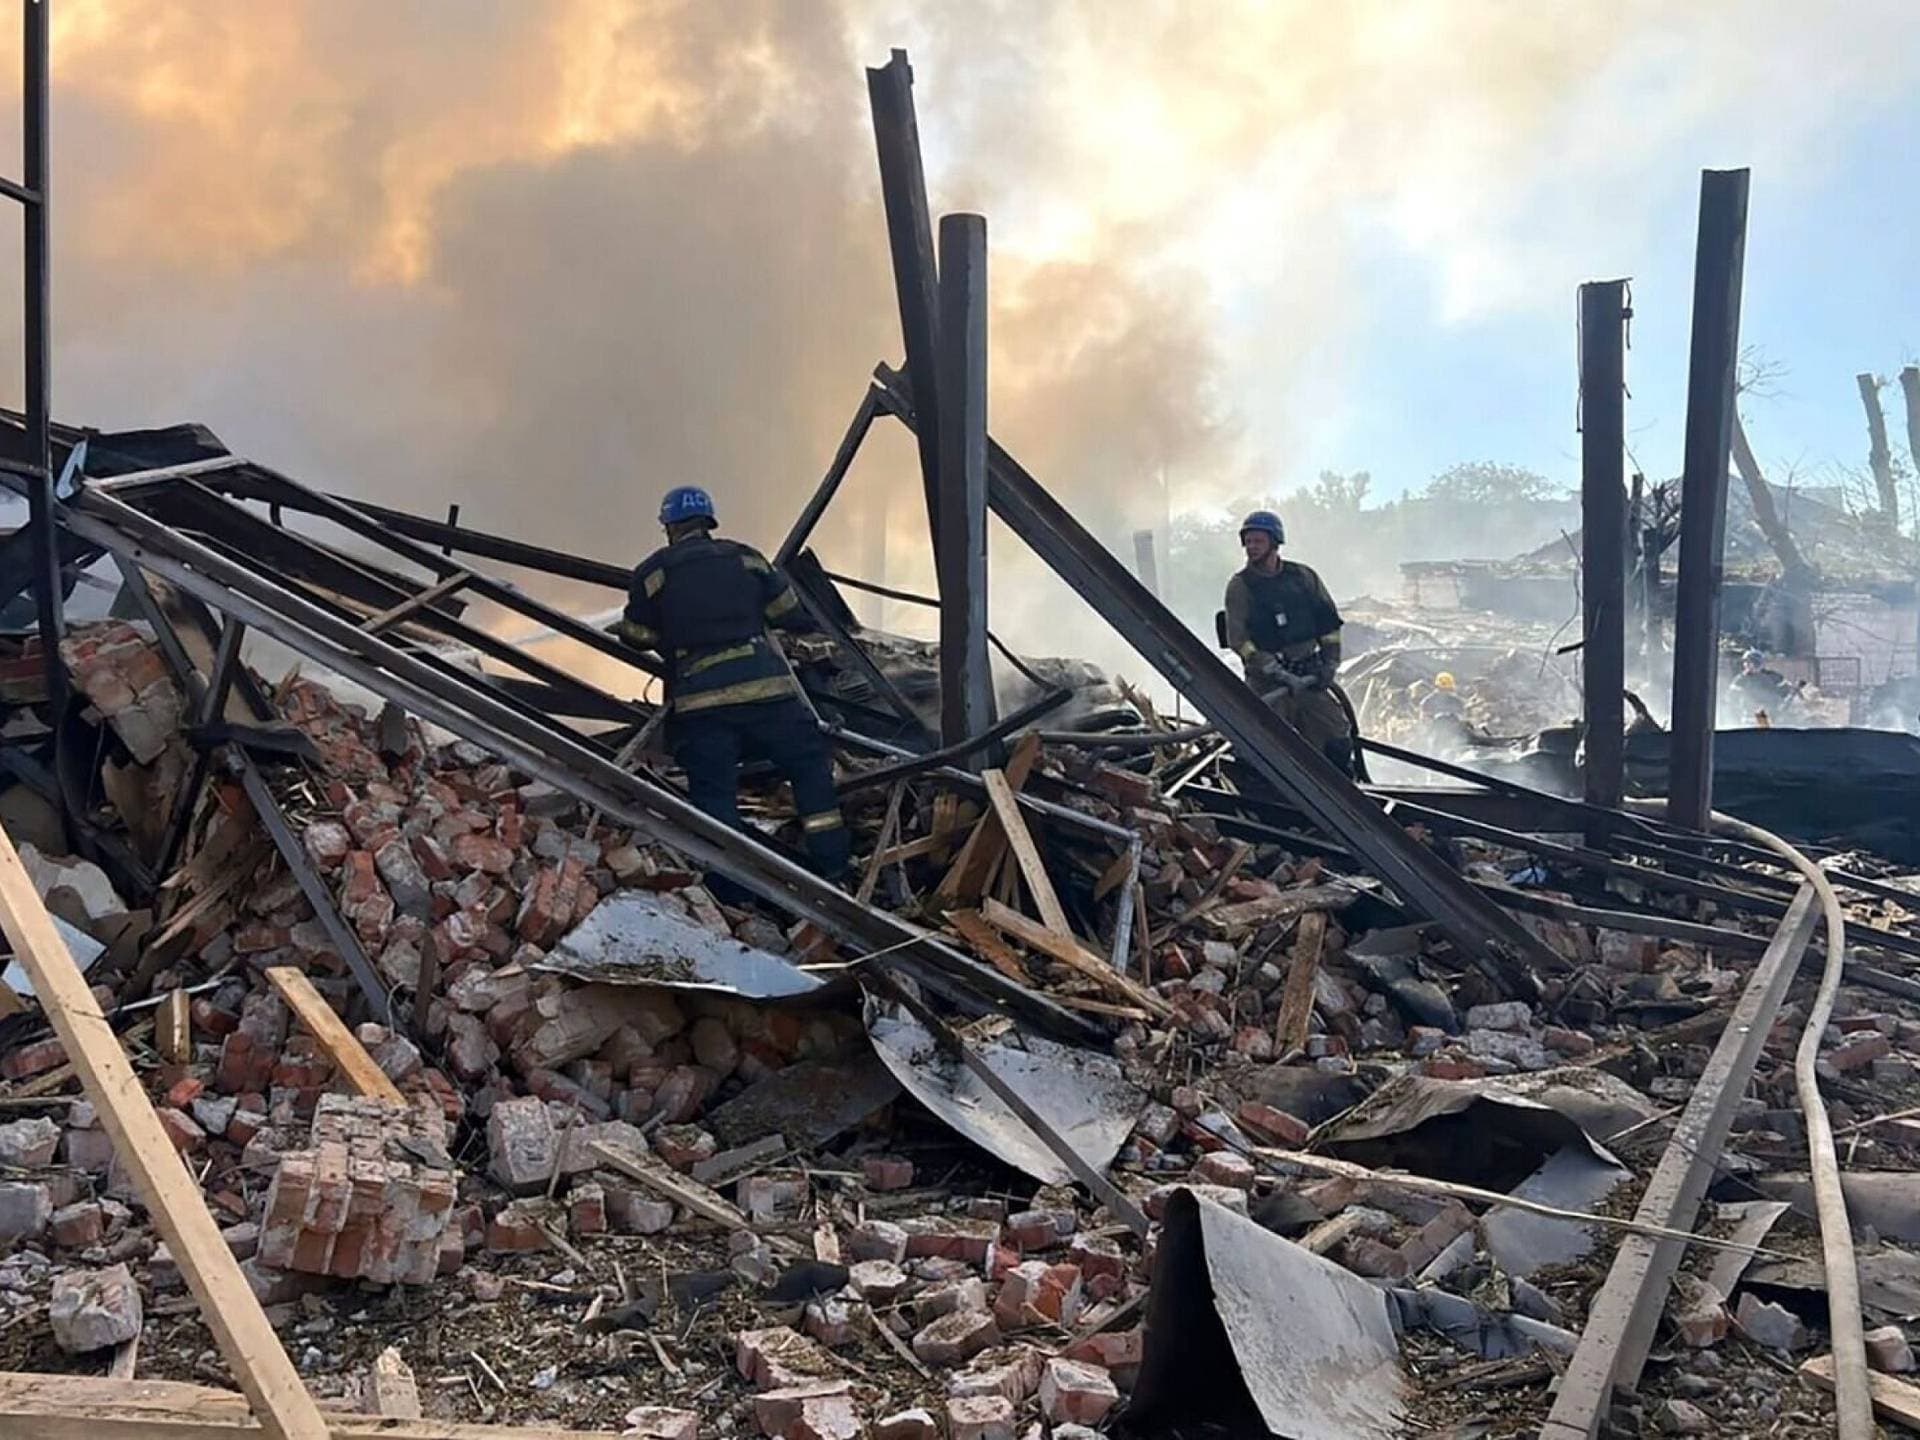 emergency services personnel work to extinguish a fire following a Russian attack in Kryvyi Rih